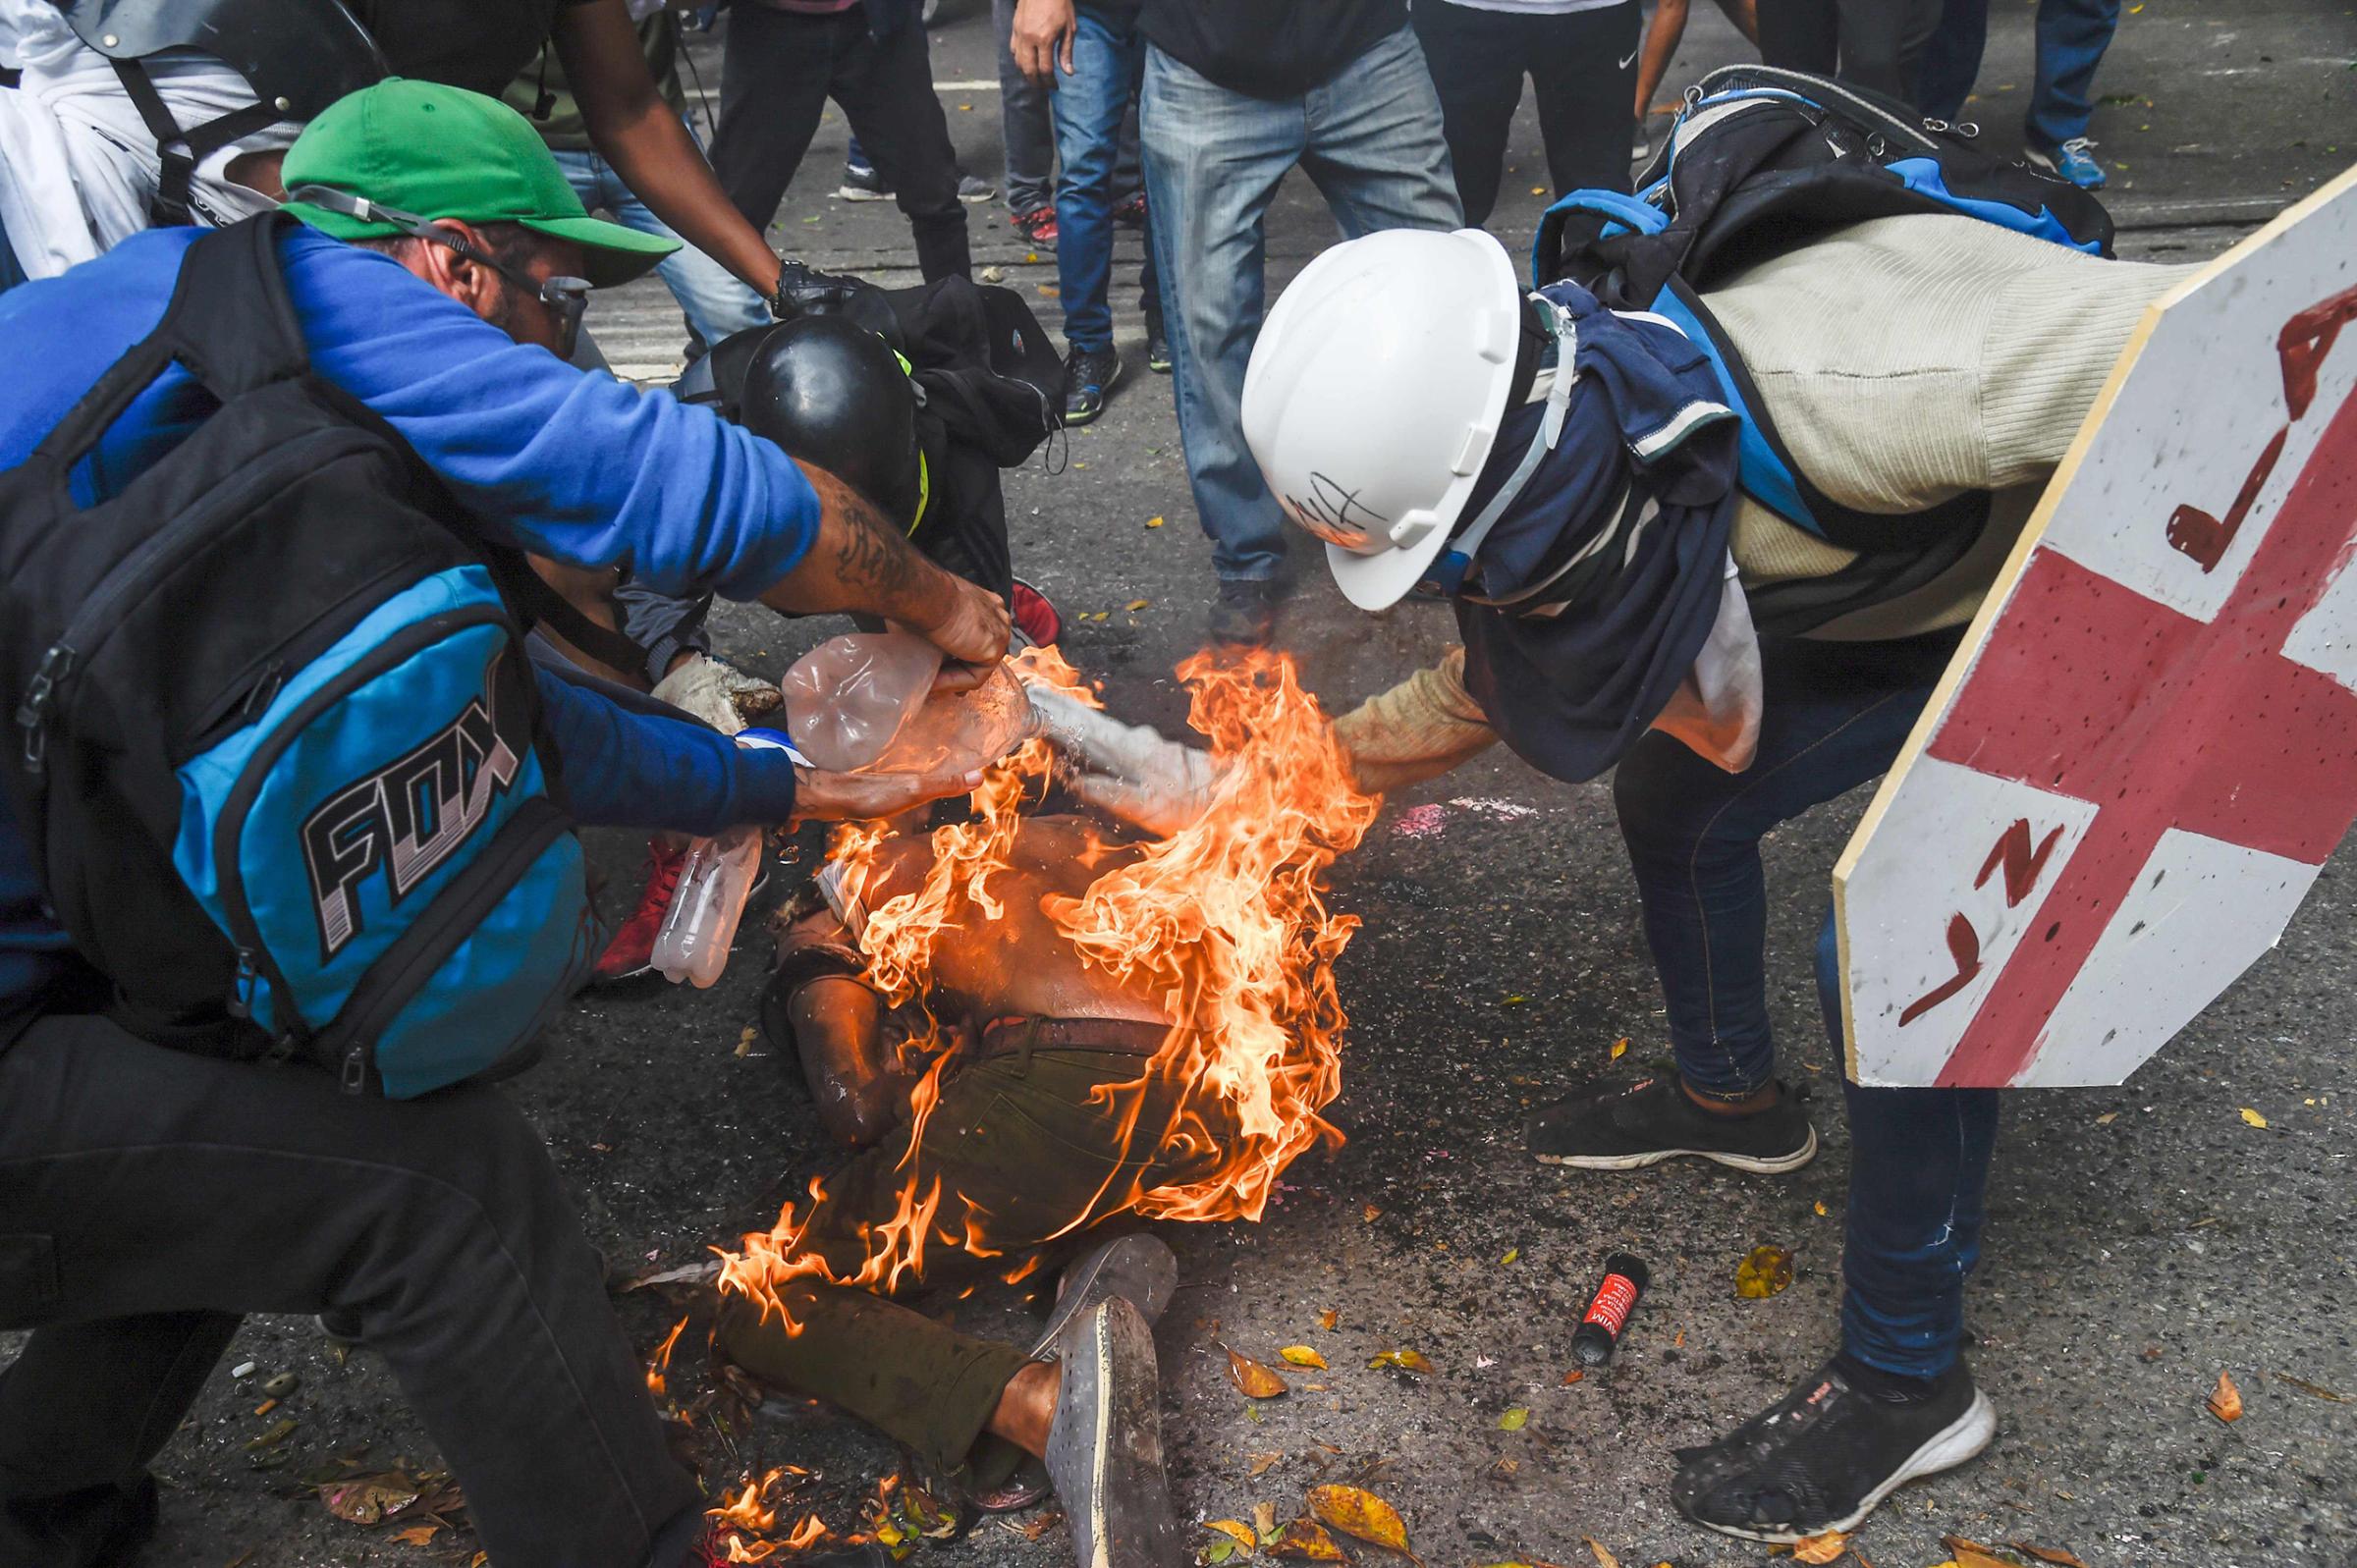 Men aid a demonstrator who caught fire during clashes in Caracas on May 3, 2017.